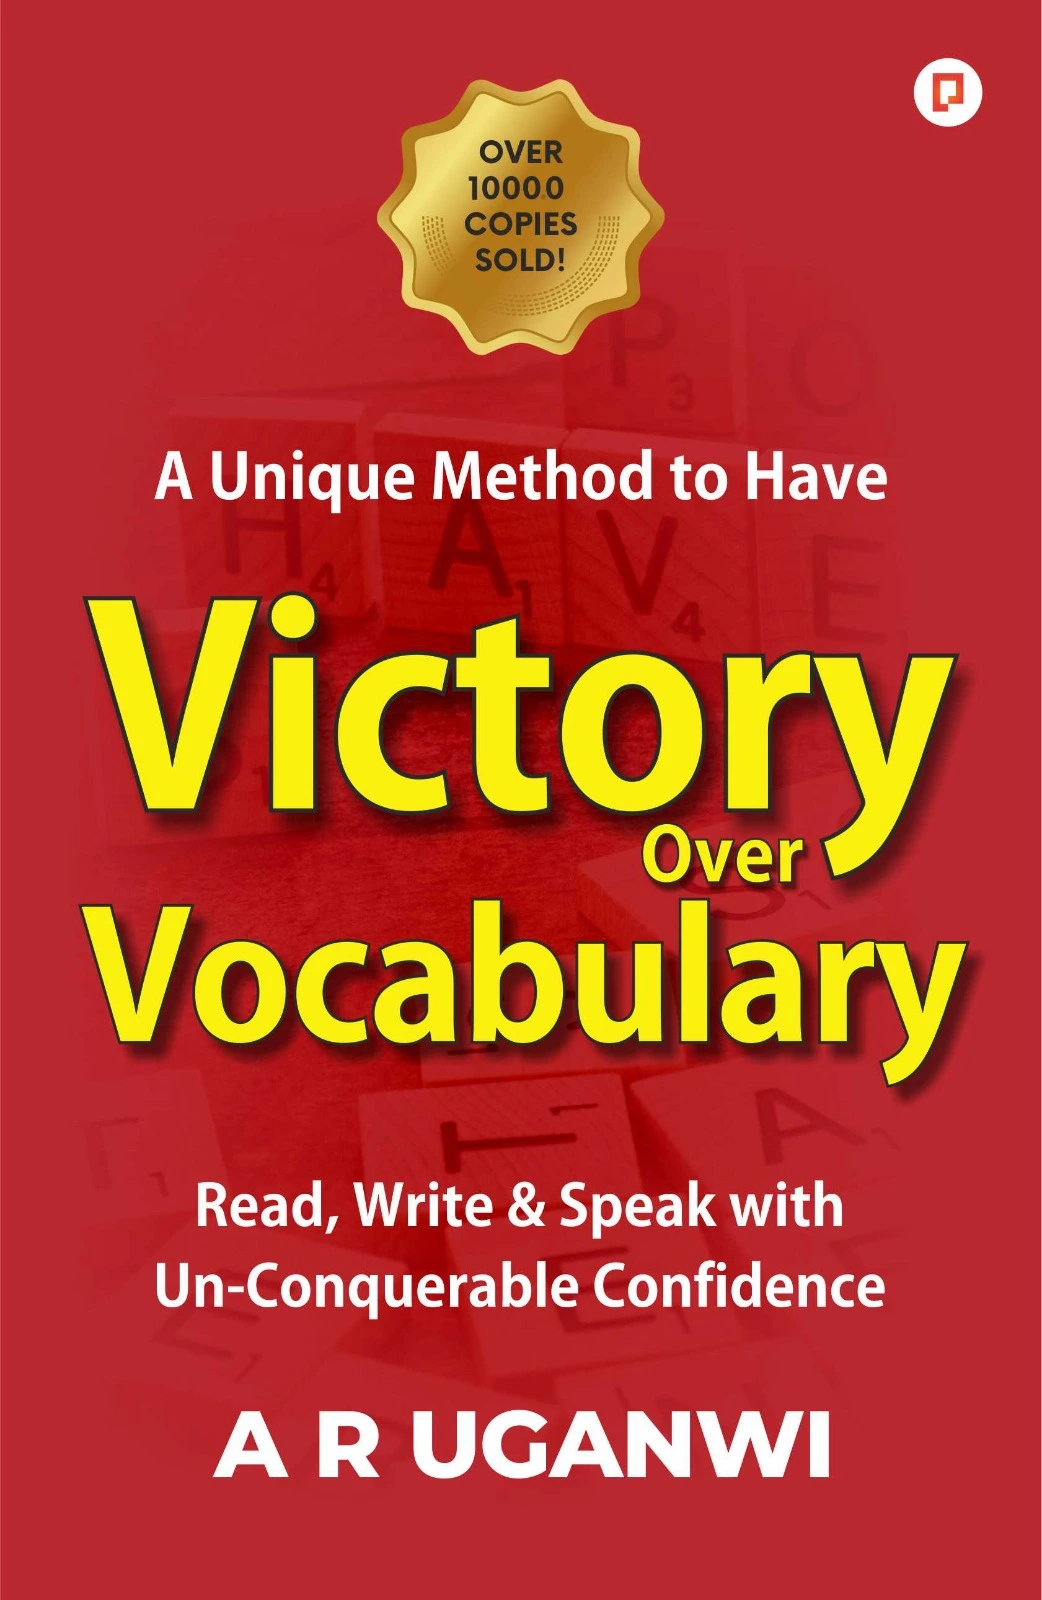 How to Have Victory Over Vocabulary: A Unique Method to Learn Vocabulary